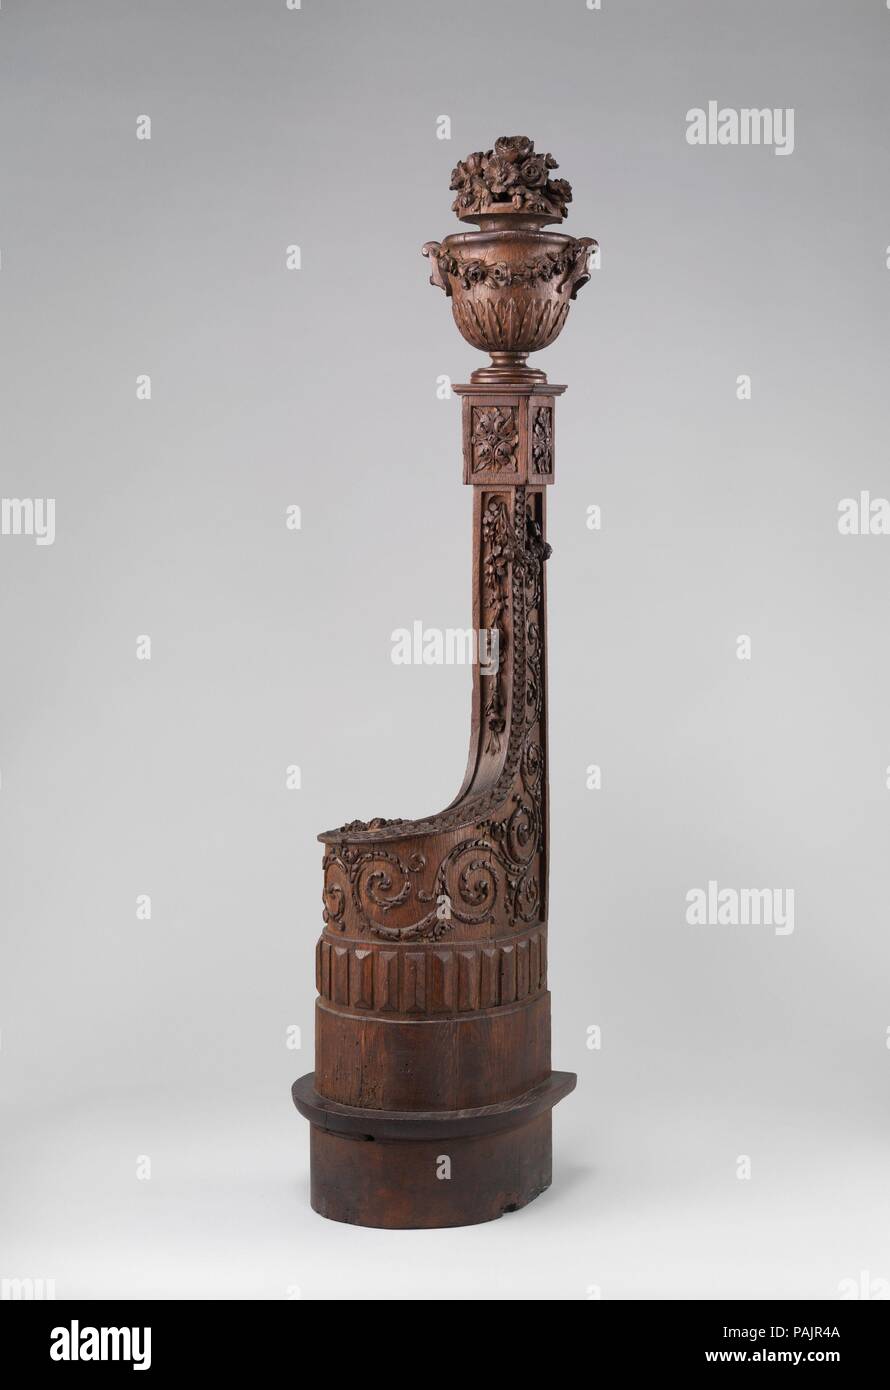 Newel post. Culture: French. Dimensions: Overall (confirmed): 64 x 14 1/2 x 14 in. (162.6 x 36.8 x 35.6 cm). Date: 18th century. Museum: Metropolitan Museum of Art, New York, USA. Stock Photo